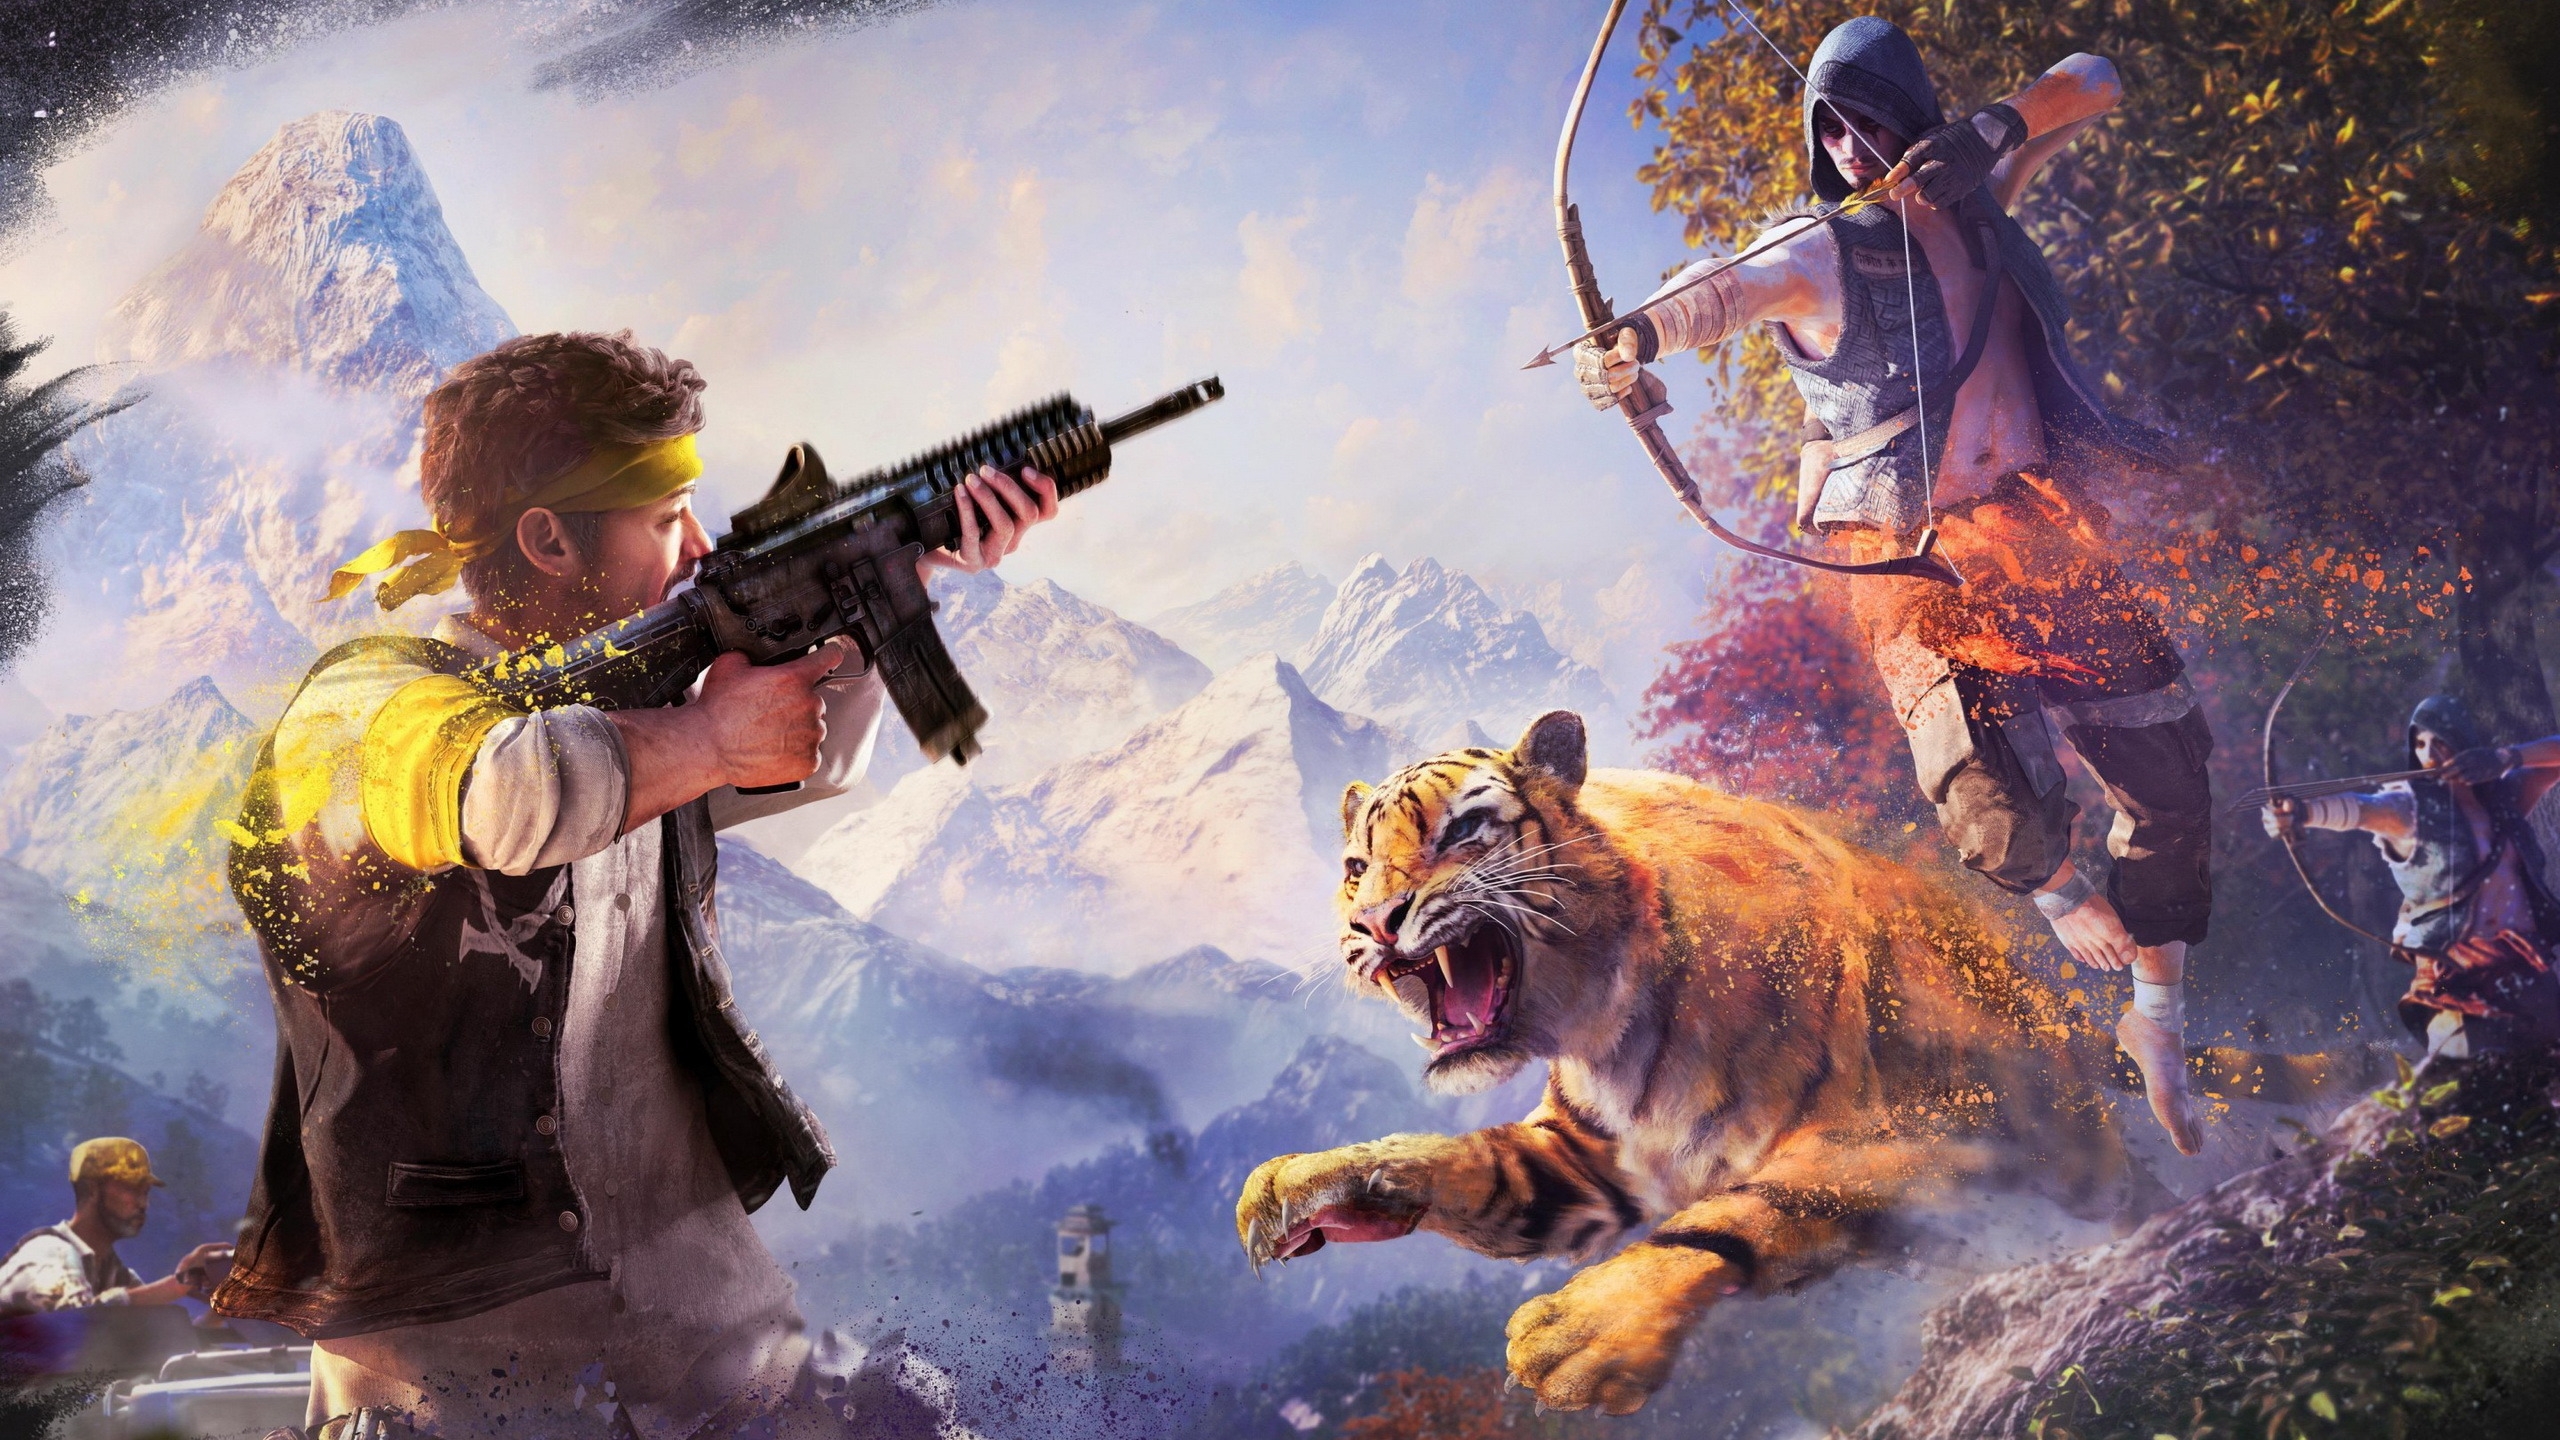 Far Cry 4 for 2560x1440 HDTV resolution